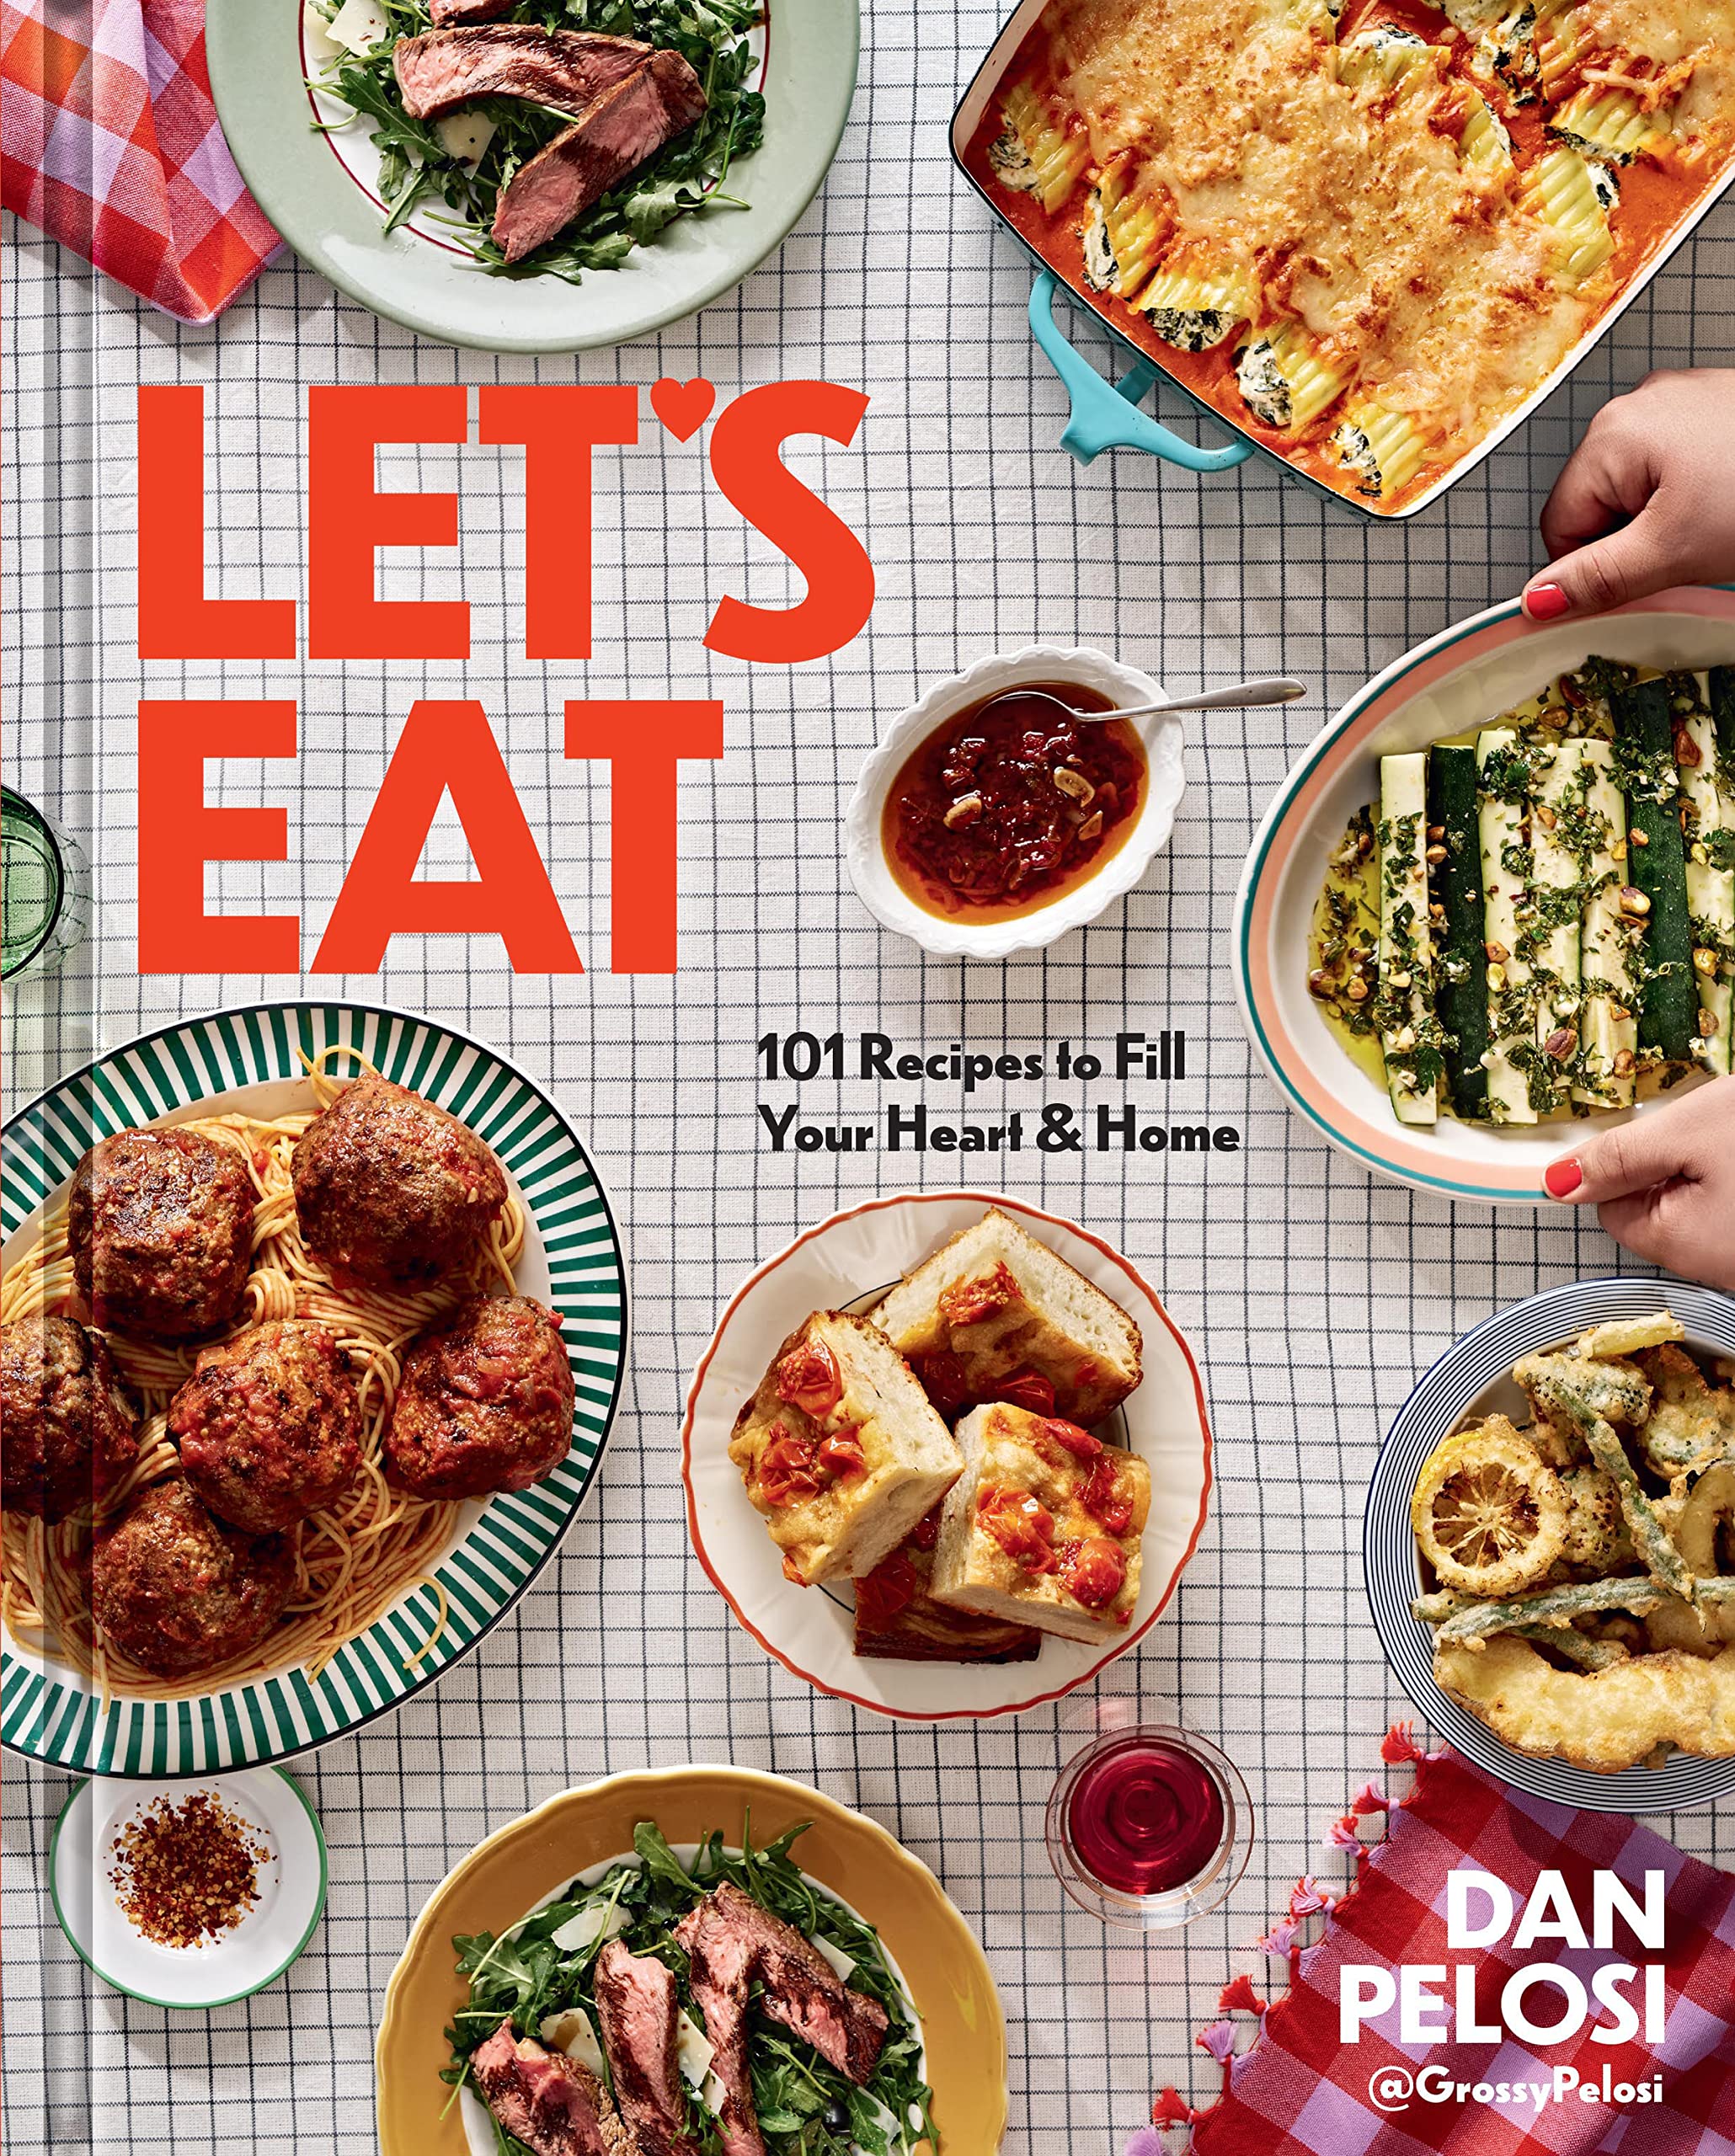 Let's Eat: 101 Recipes to Fill Your Heart & Home (Dan Pelosi) *Signed*